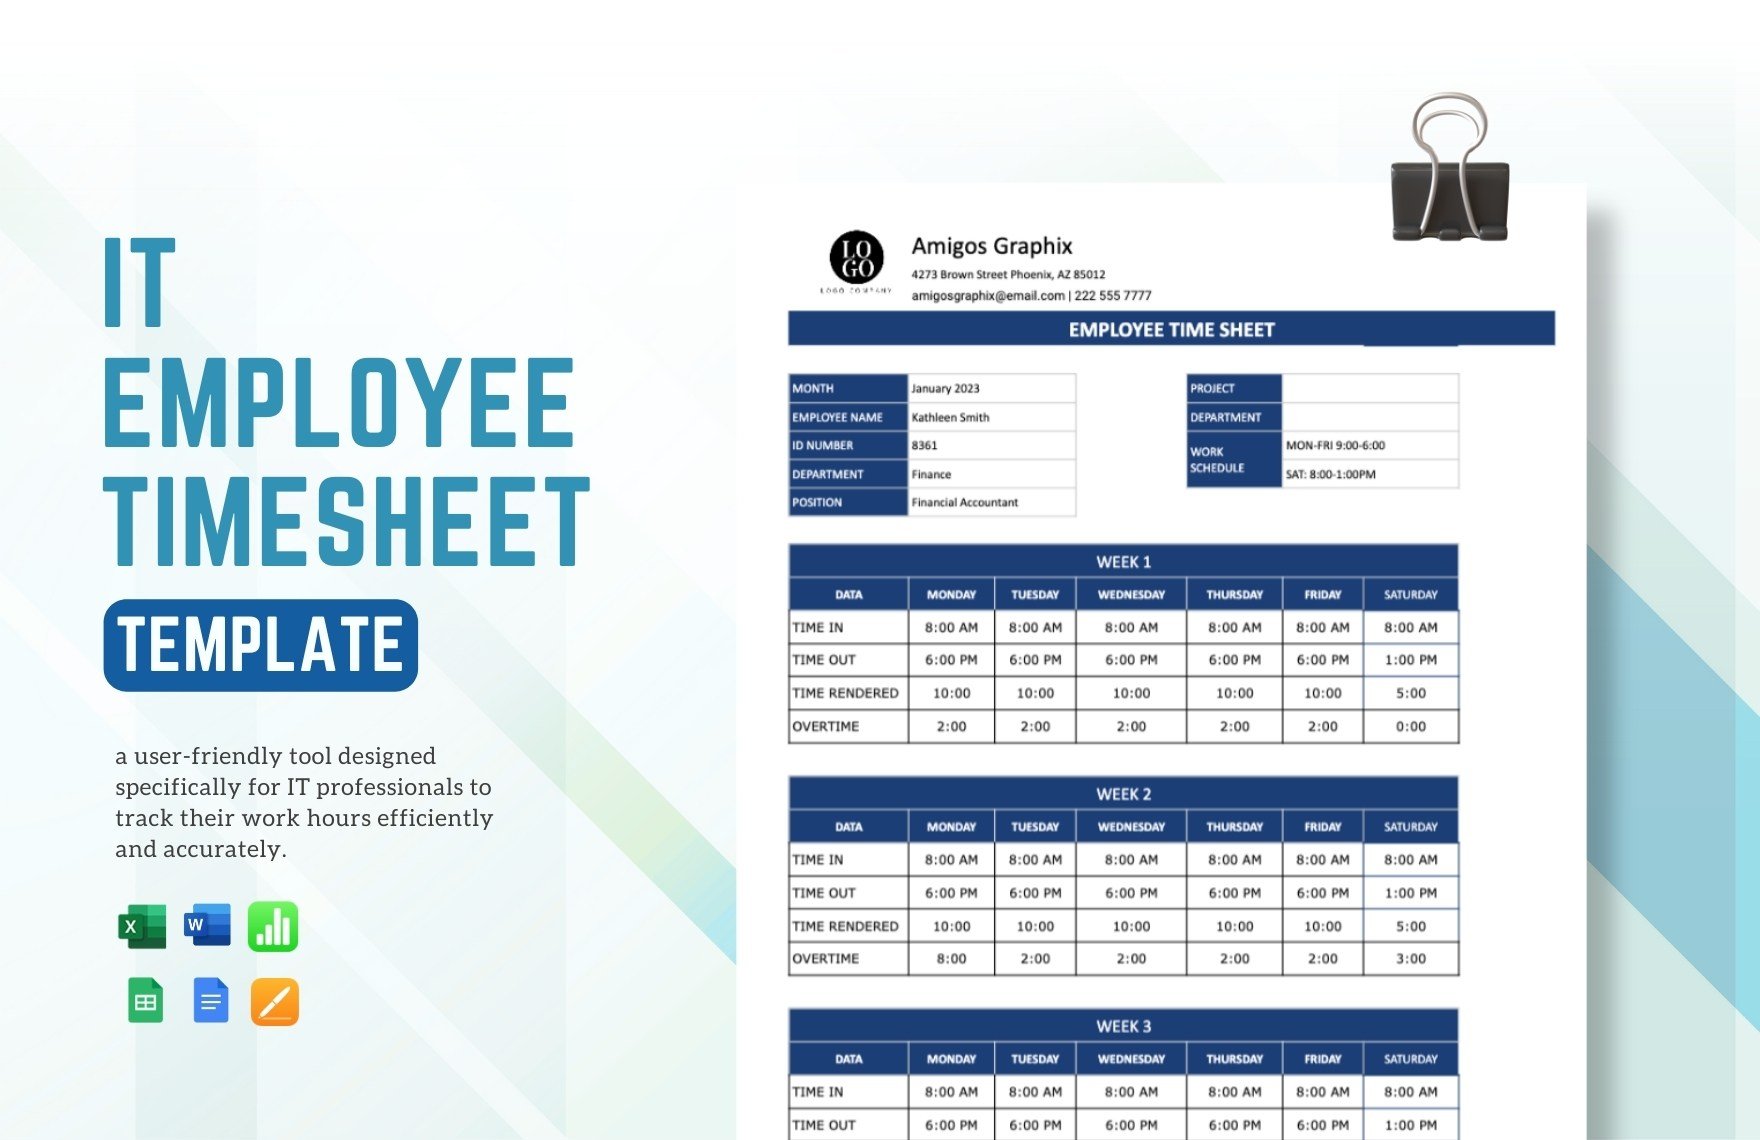 IT Employee Timesheet Template in Word, Google Docs, Excel, Google Sheets, Apple Pages, Apple Numbers